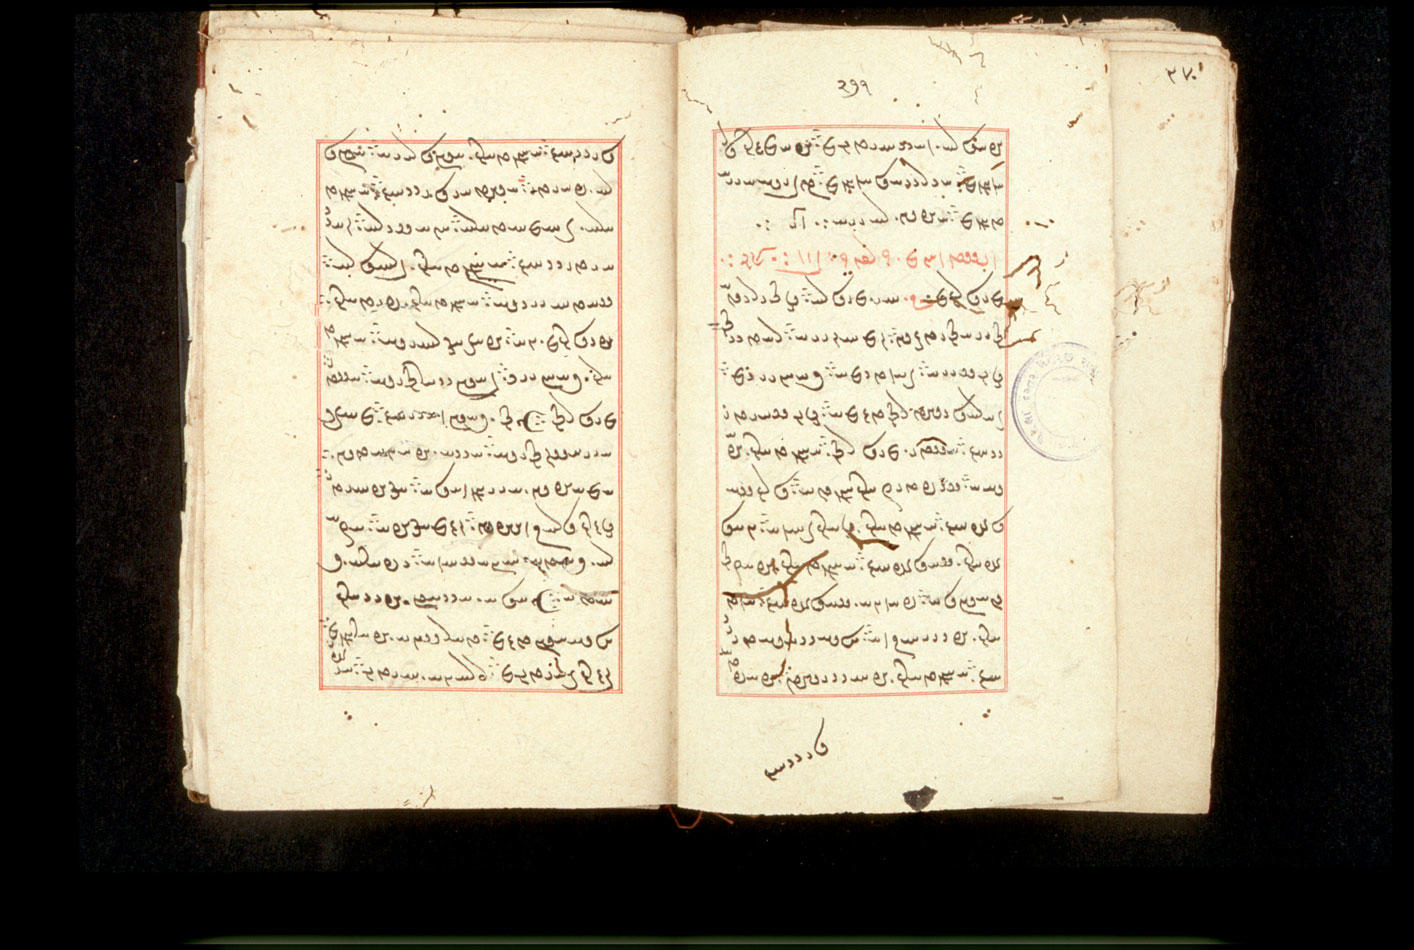 Folios 271v (right) and 272r (left)